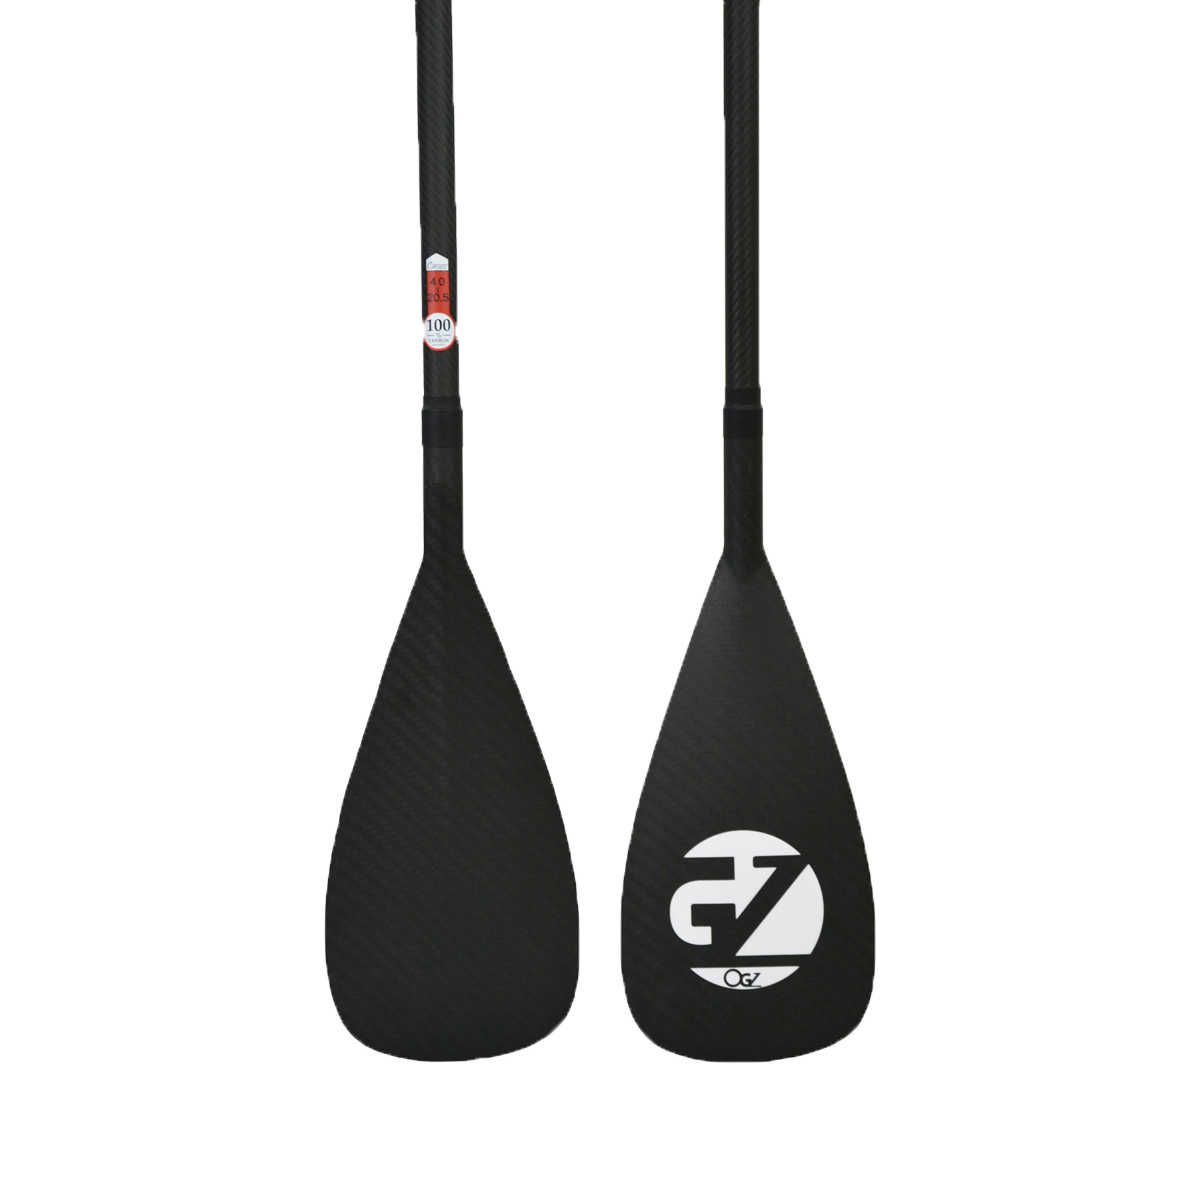 Pagaie de stand up paddle CROSS Full Carbon FIXE